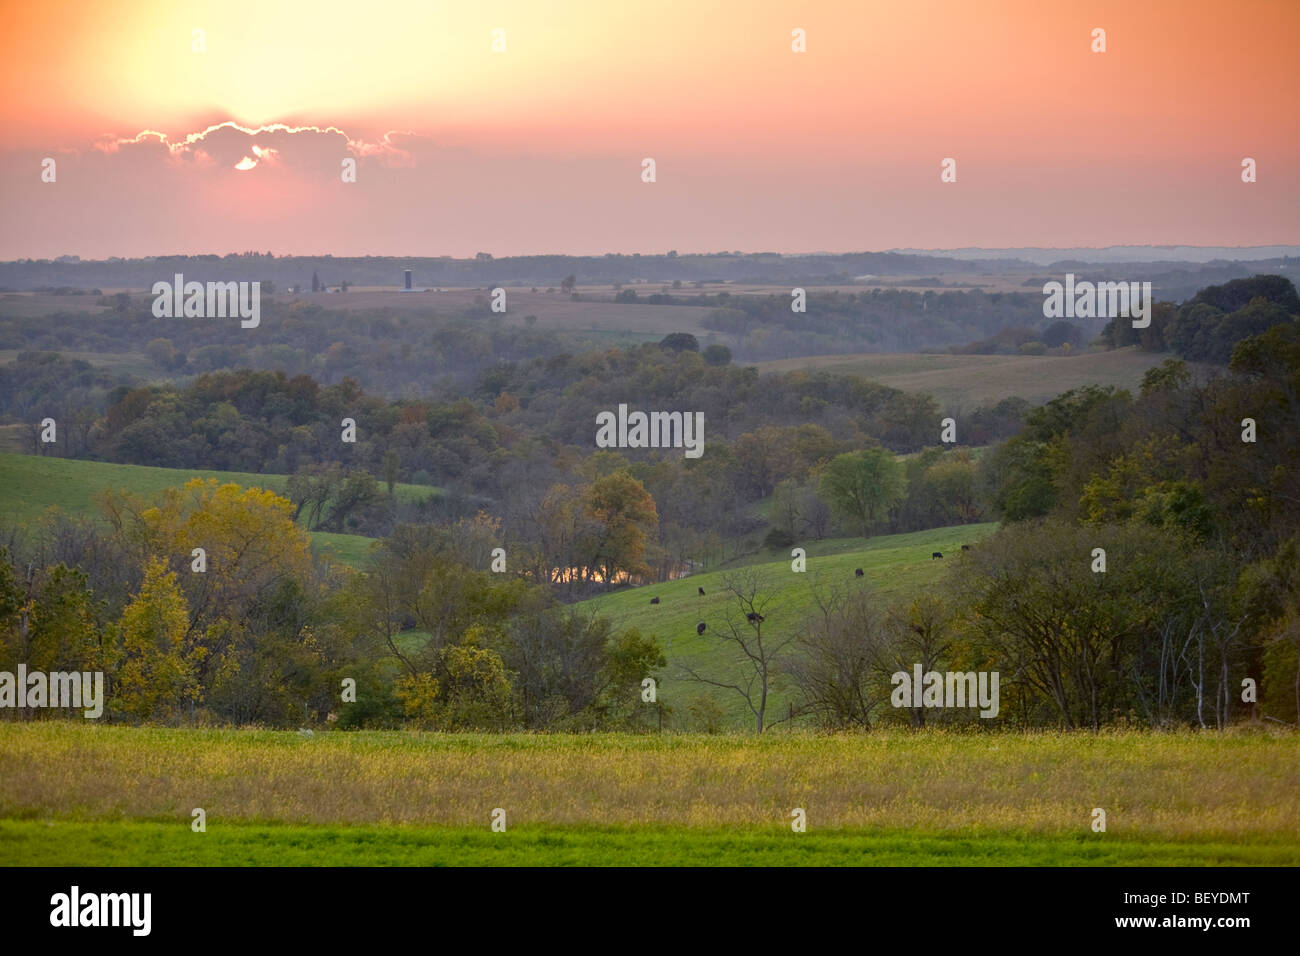 Sunset over rural Iowa landscape of pasture, cattle and woodlands north of Waukon, Iowa, USA Stock Photo